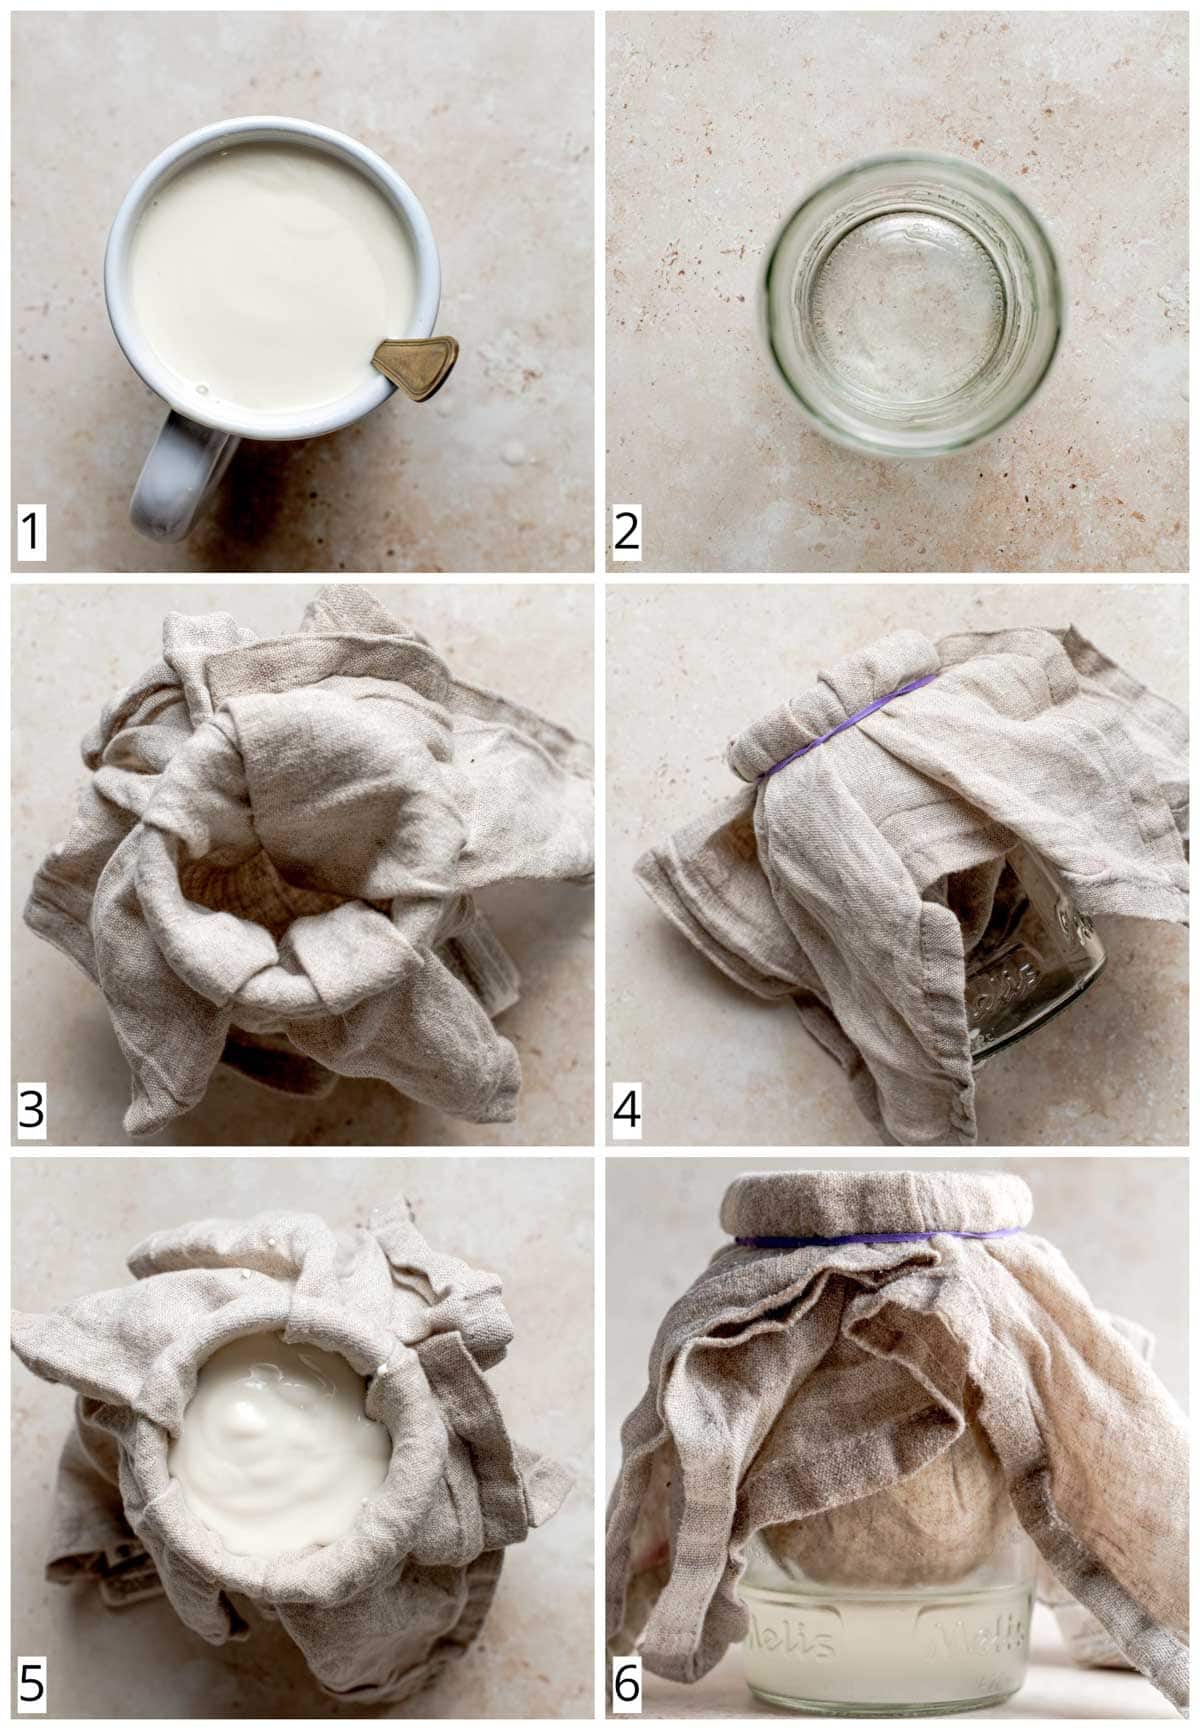 A collage of 6 images showing steps in making vegan quark.